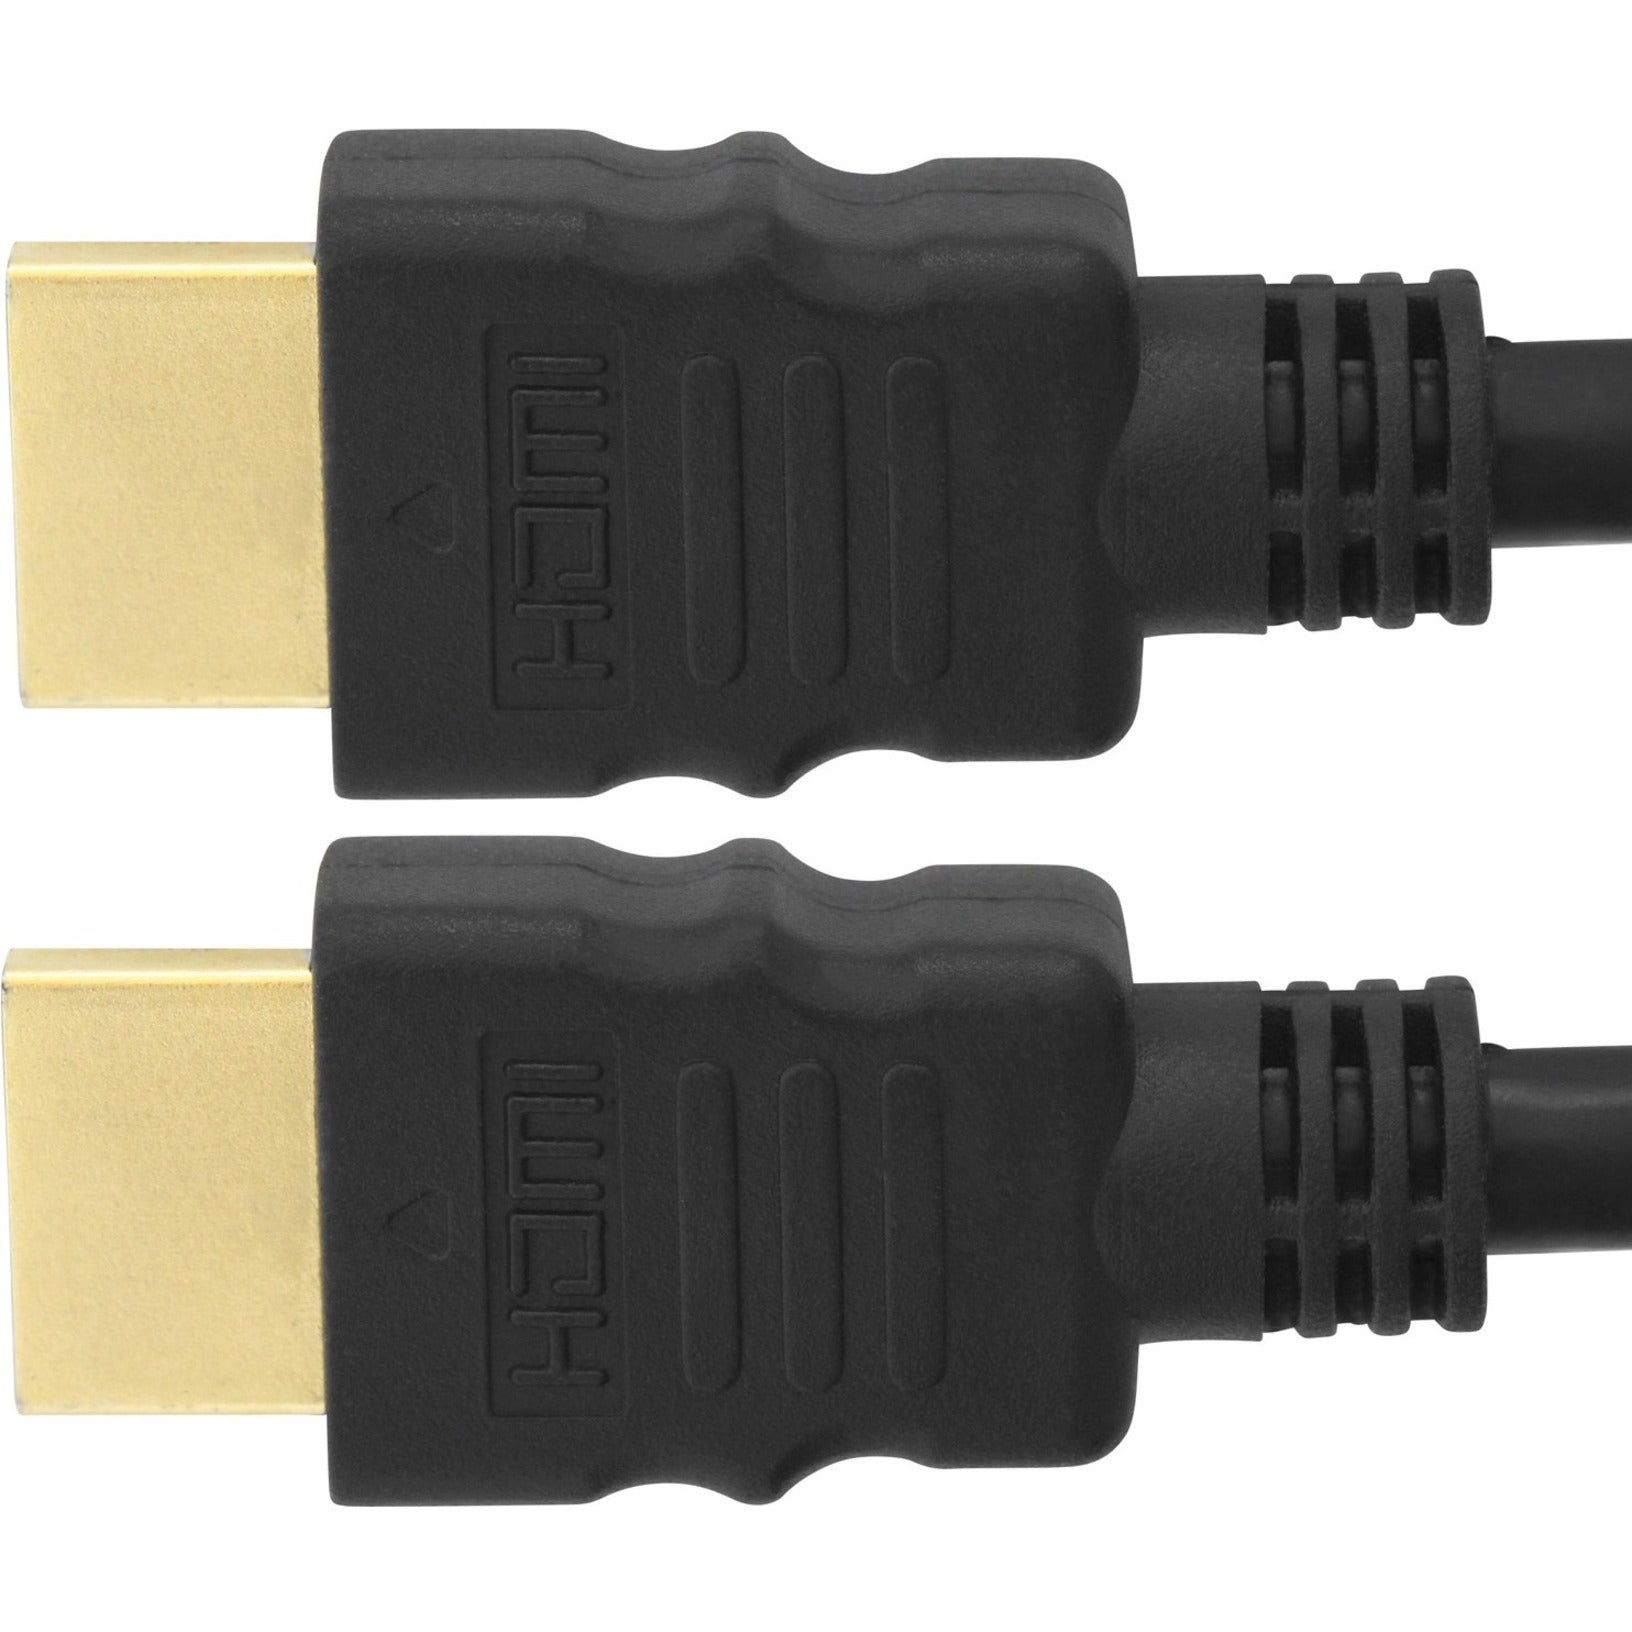 4XEM 4XHDMIMM10FT 10ft 3m High Speed HDMI Cable, Supports 1080p 3D, Ethernet, and Audio Return Channel